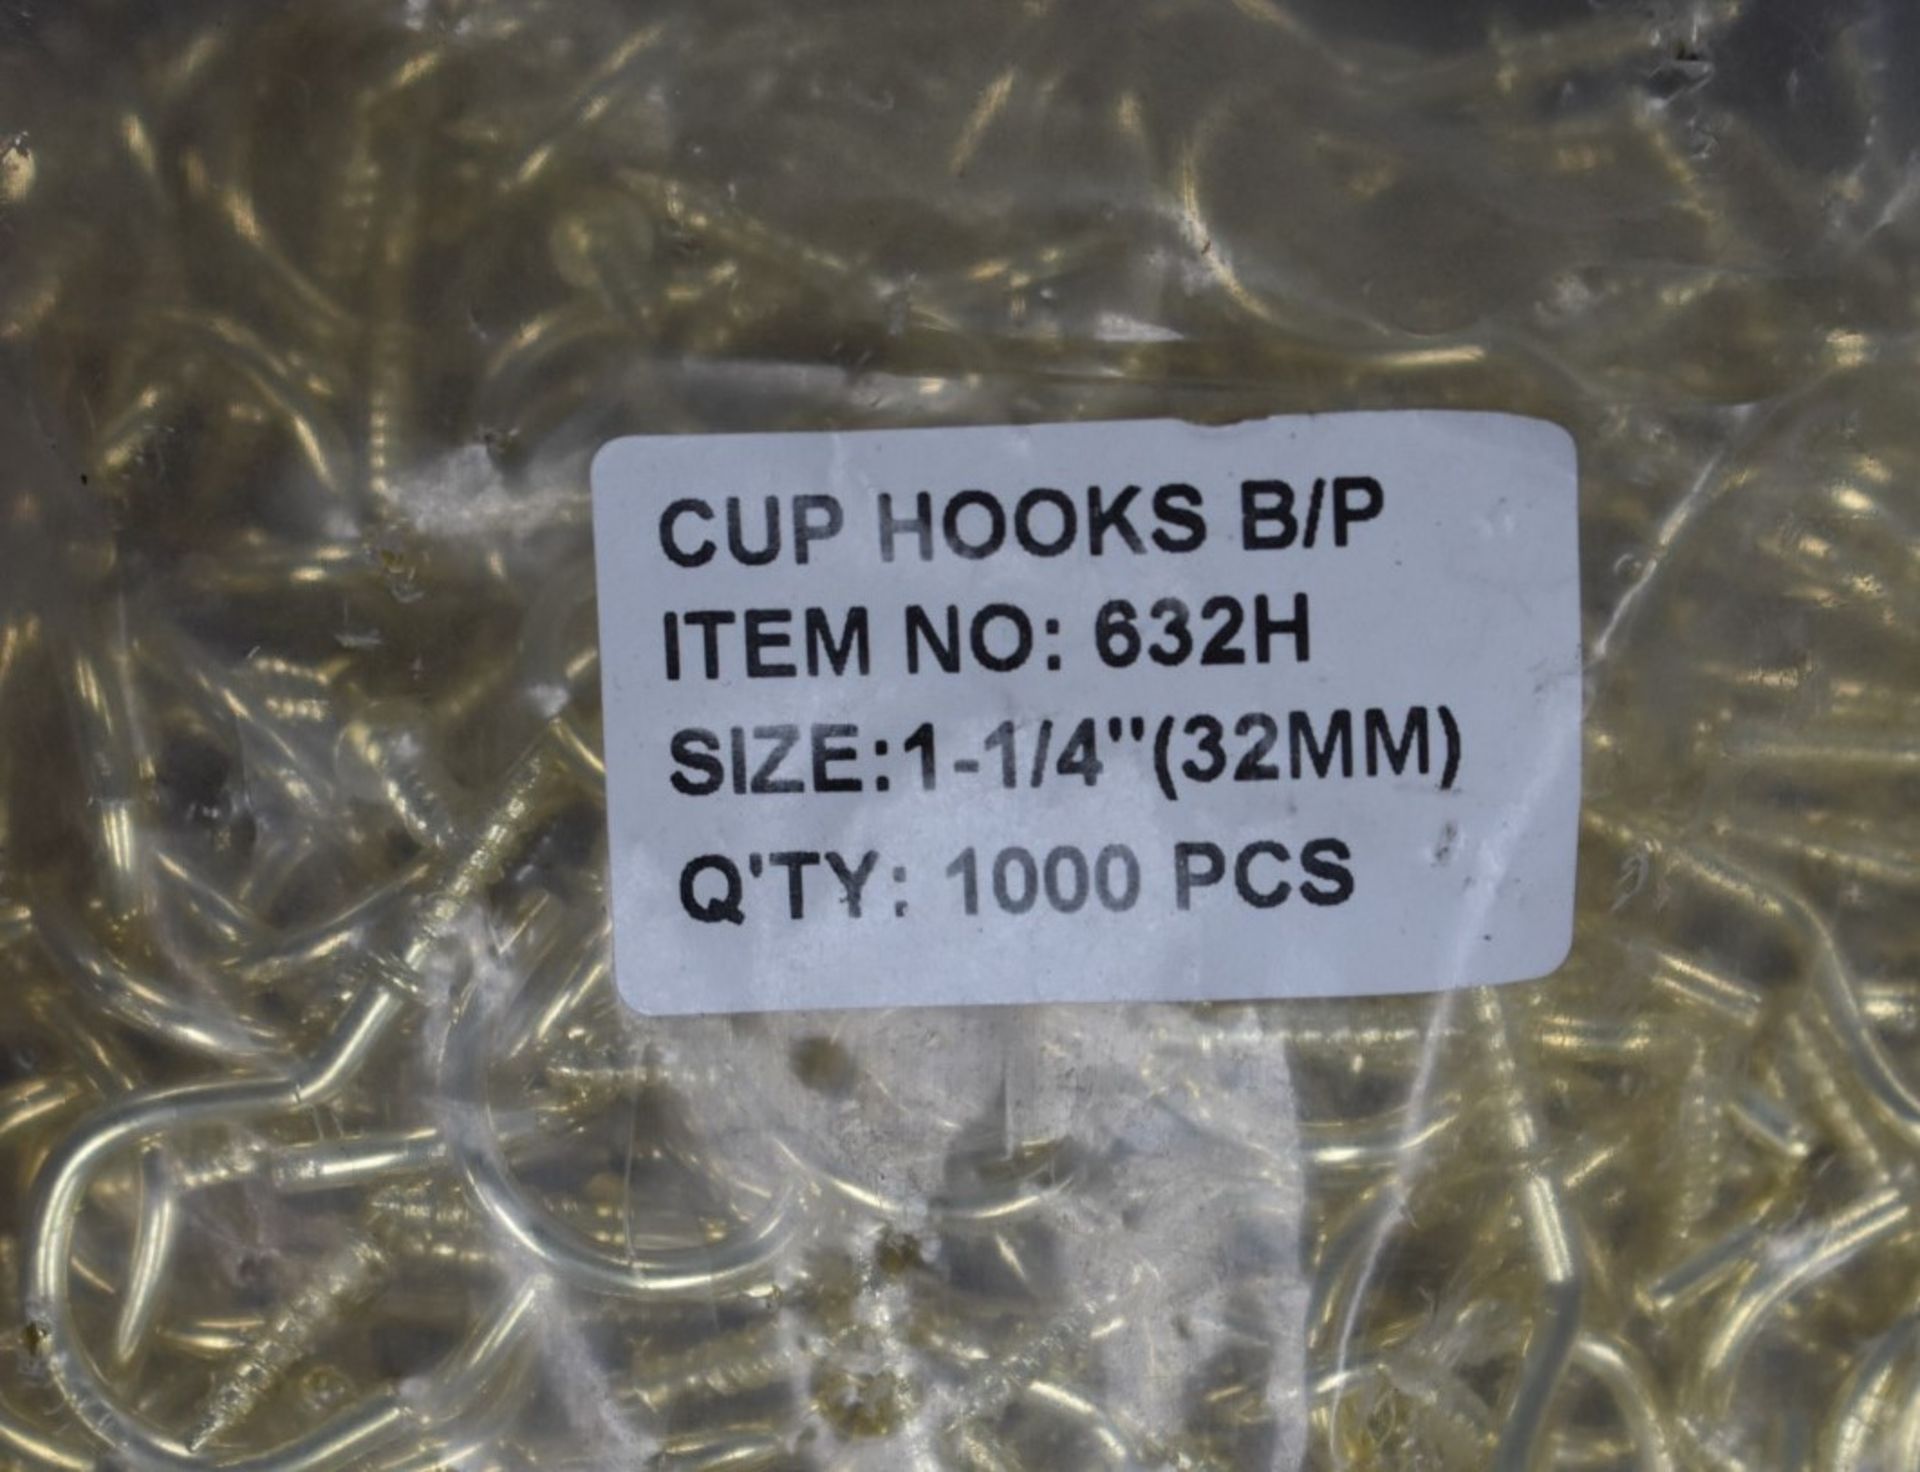 1,000 x Brass Plated Cup Screw Hooks - Product Code 632H - Size 1-1/4" 32mm - Supplied in 1 Bag of - Image 3 of 3